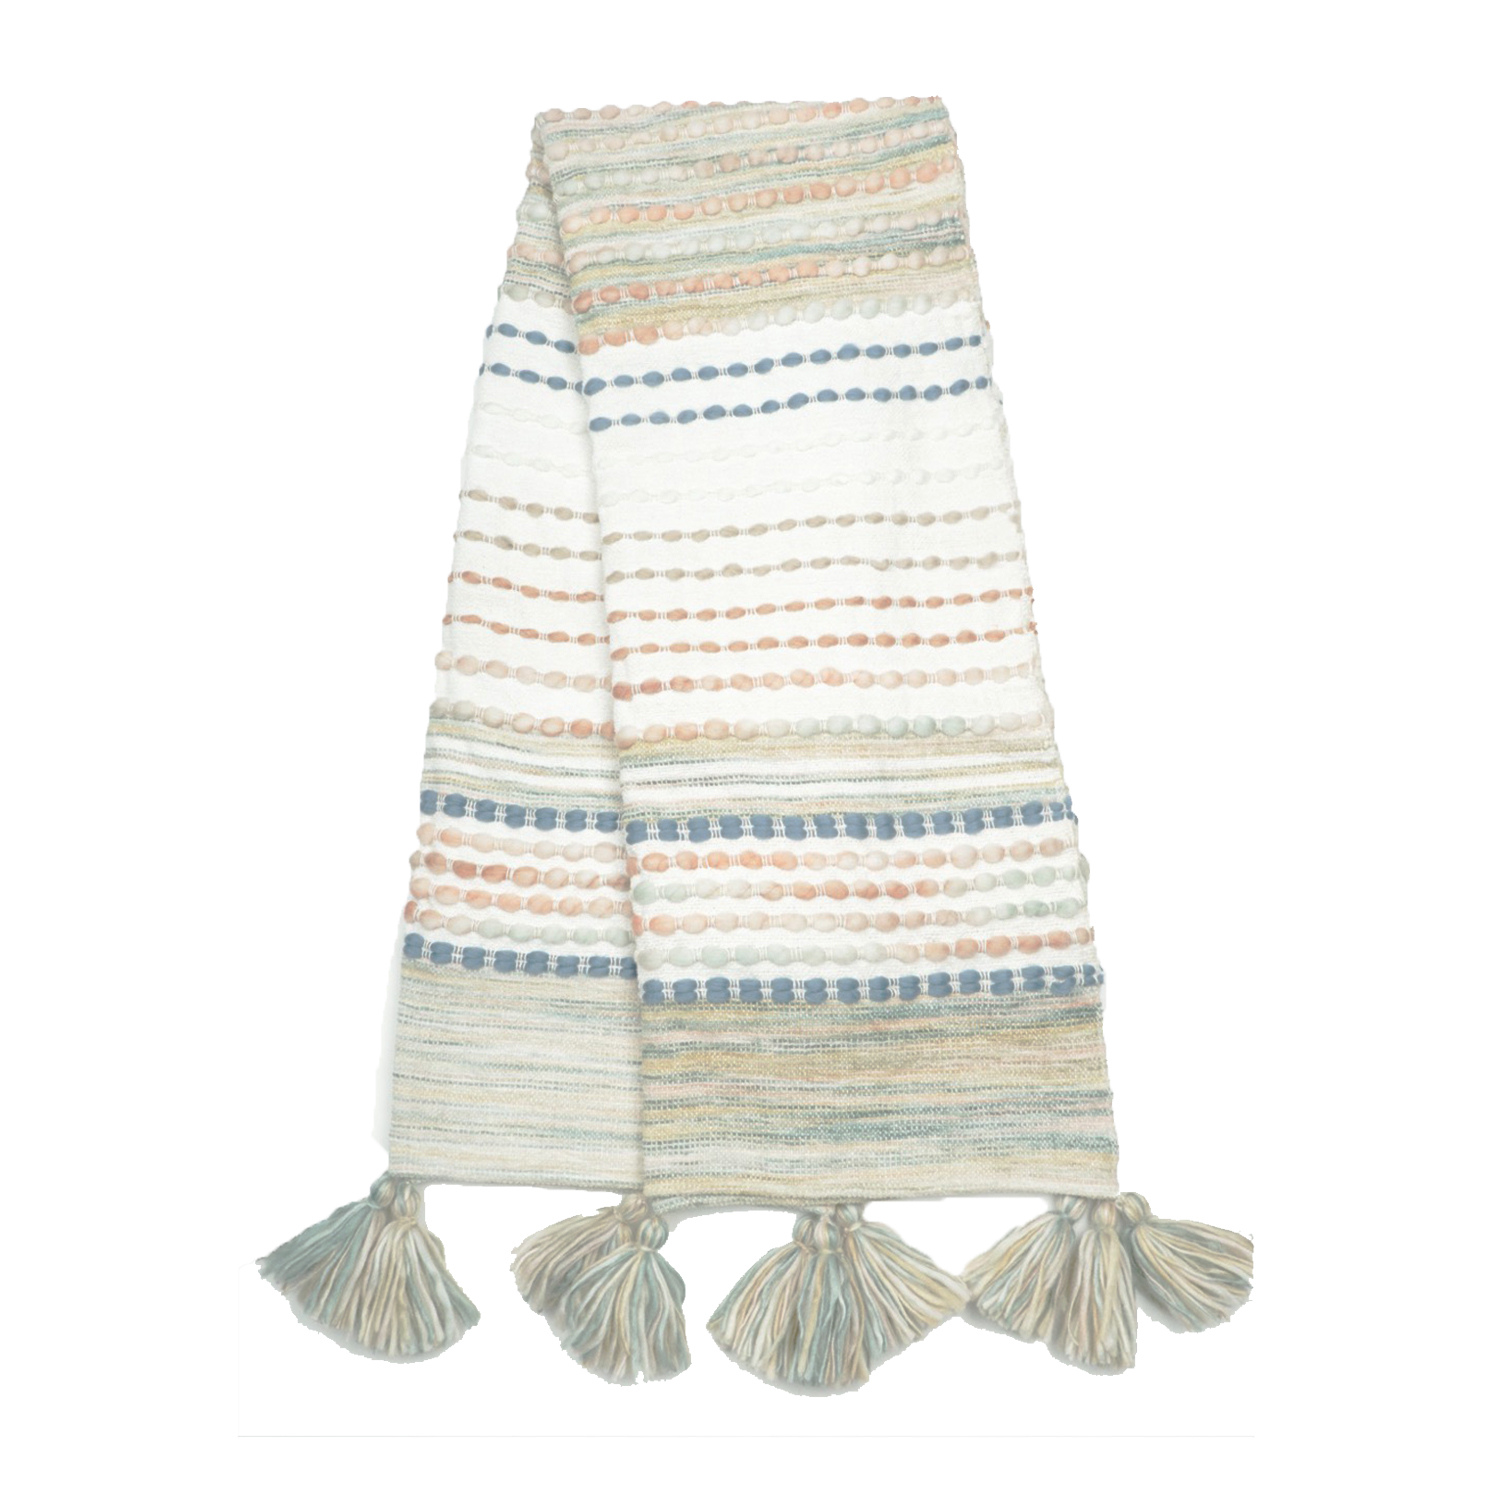 Woven Textured Throw With Tassels Pastel 125x150cm Gift